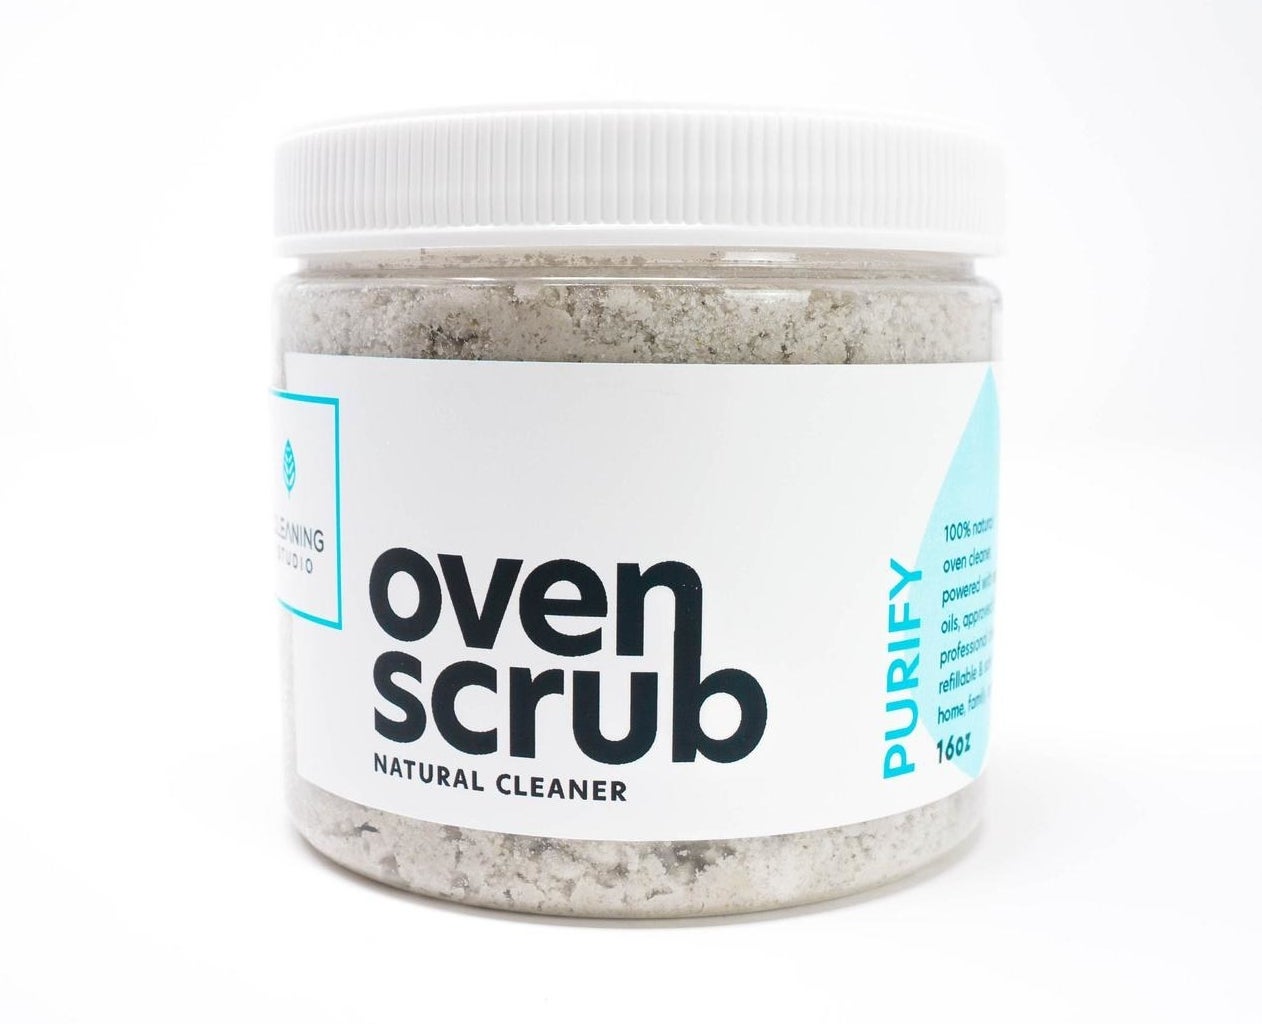 clear jar of an oven scrub natural cleaner